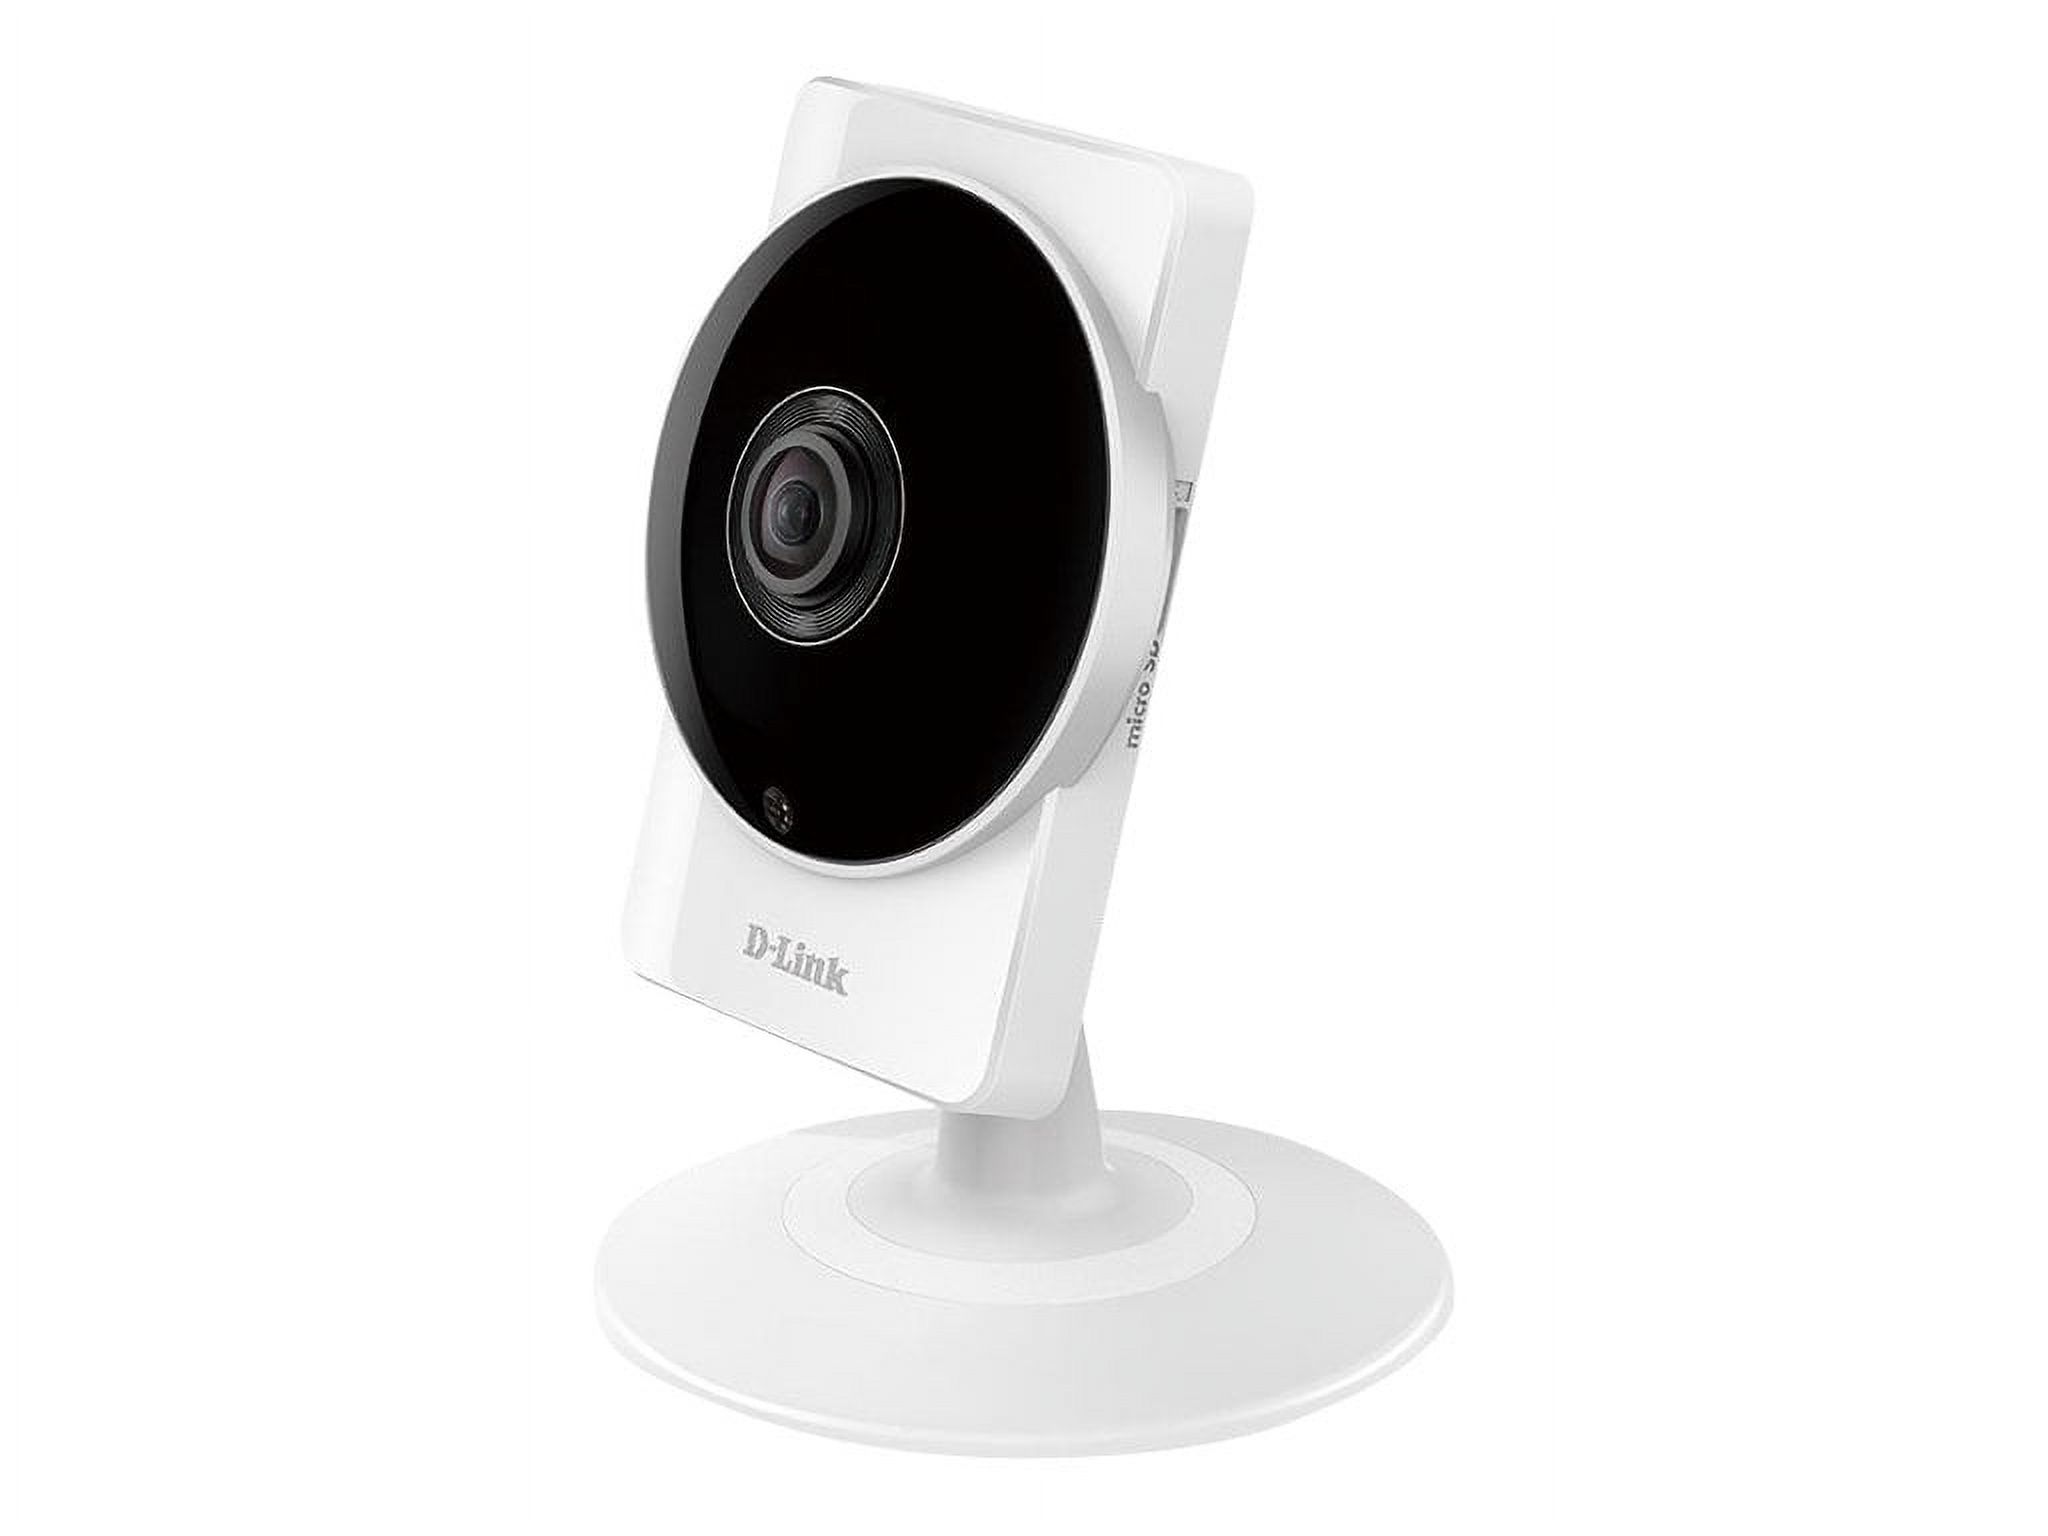 mydlink Home Panoramic HD Camera - Network surveillance camera - color (Day&Night) - 1280 x 720 - fixed focal - audio - Wi-Fi - MJPEG, H.264 - DC 5 V - image 1 of 7